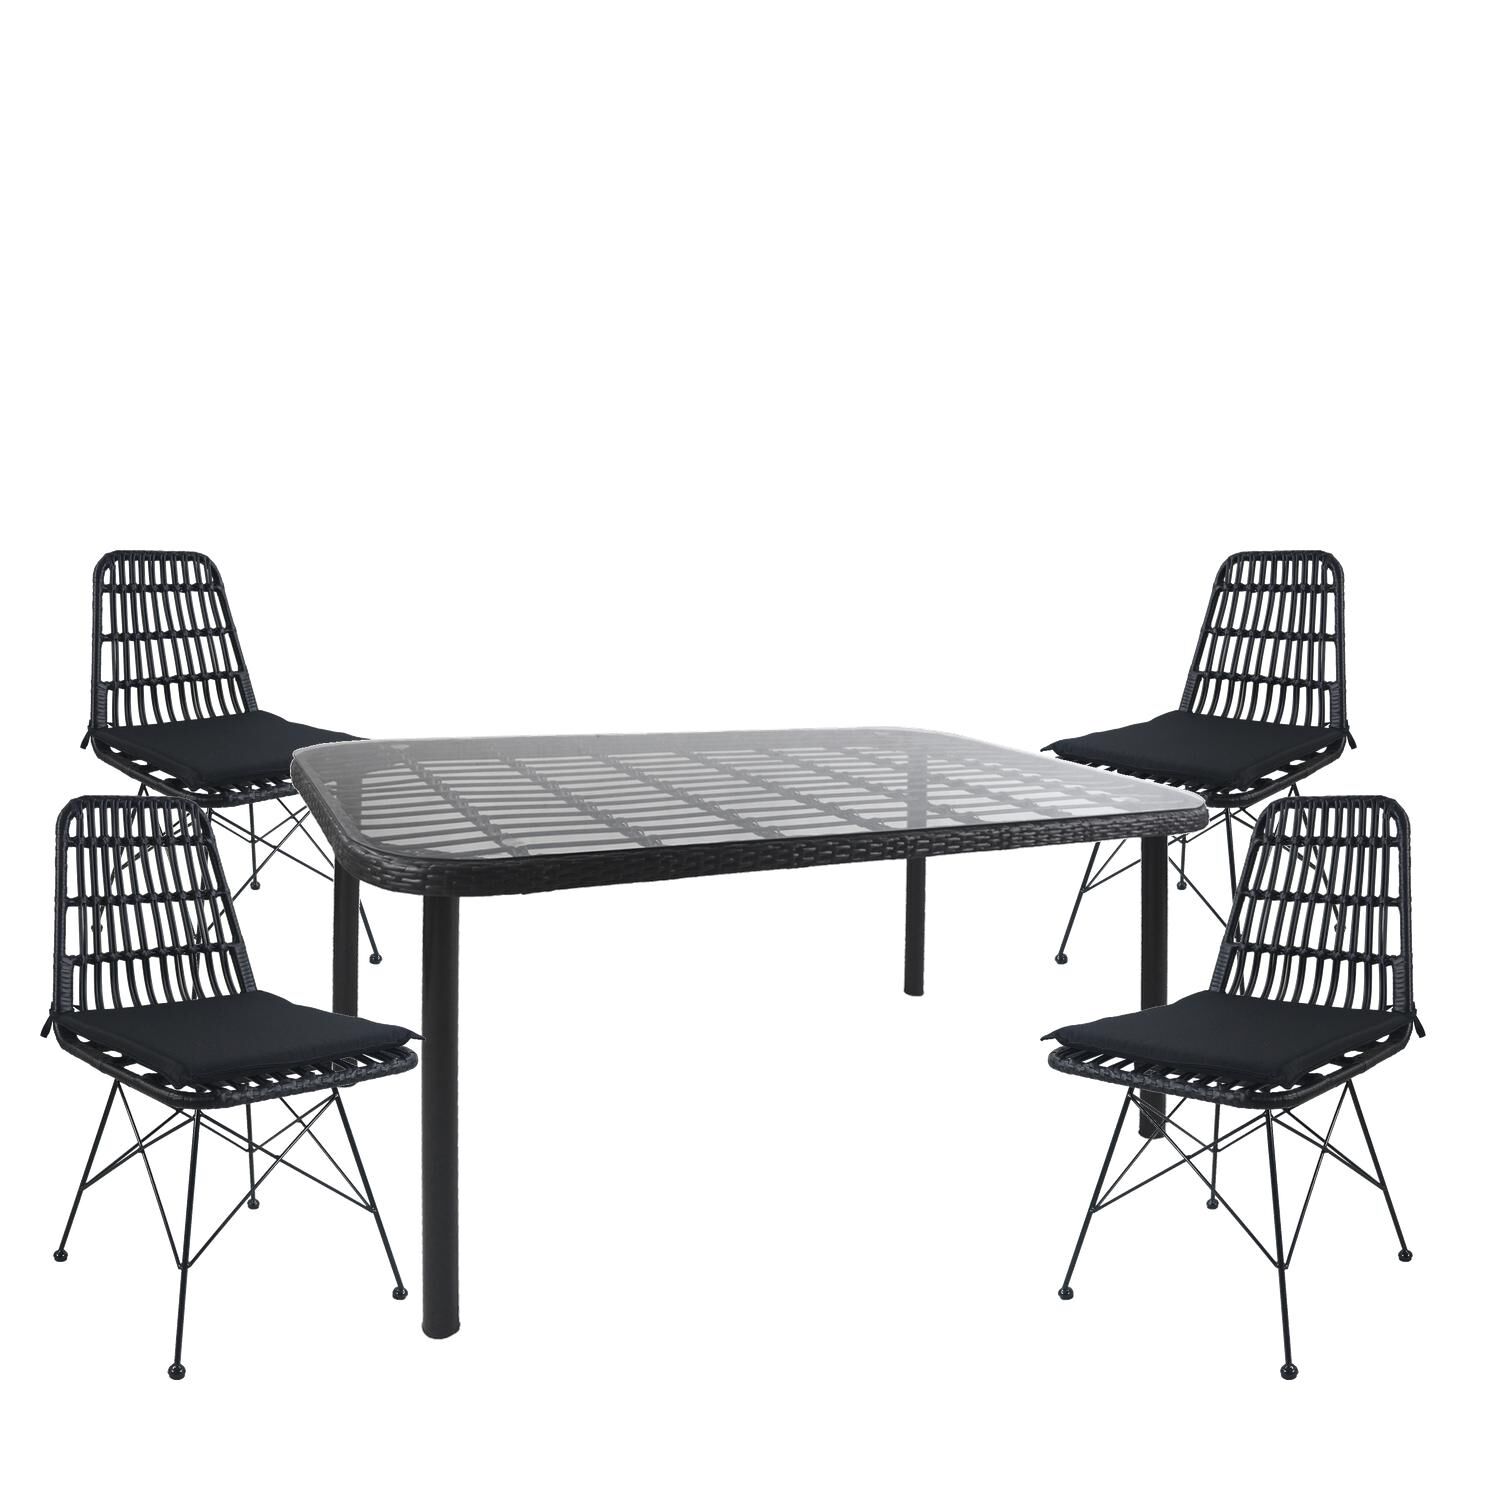 AMPIUS Garden Dining Set Black Metal/Rattan/Glass With 4 Chairs 14990361